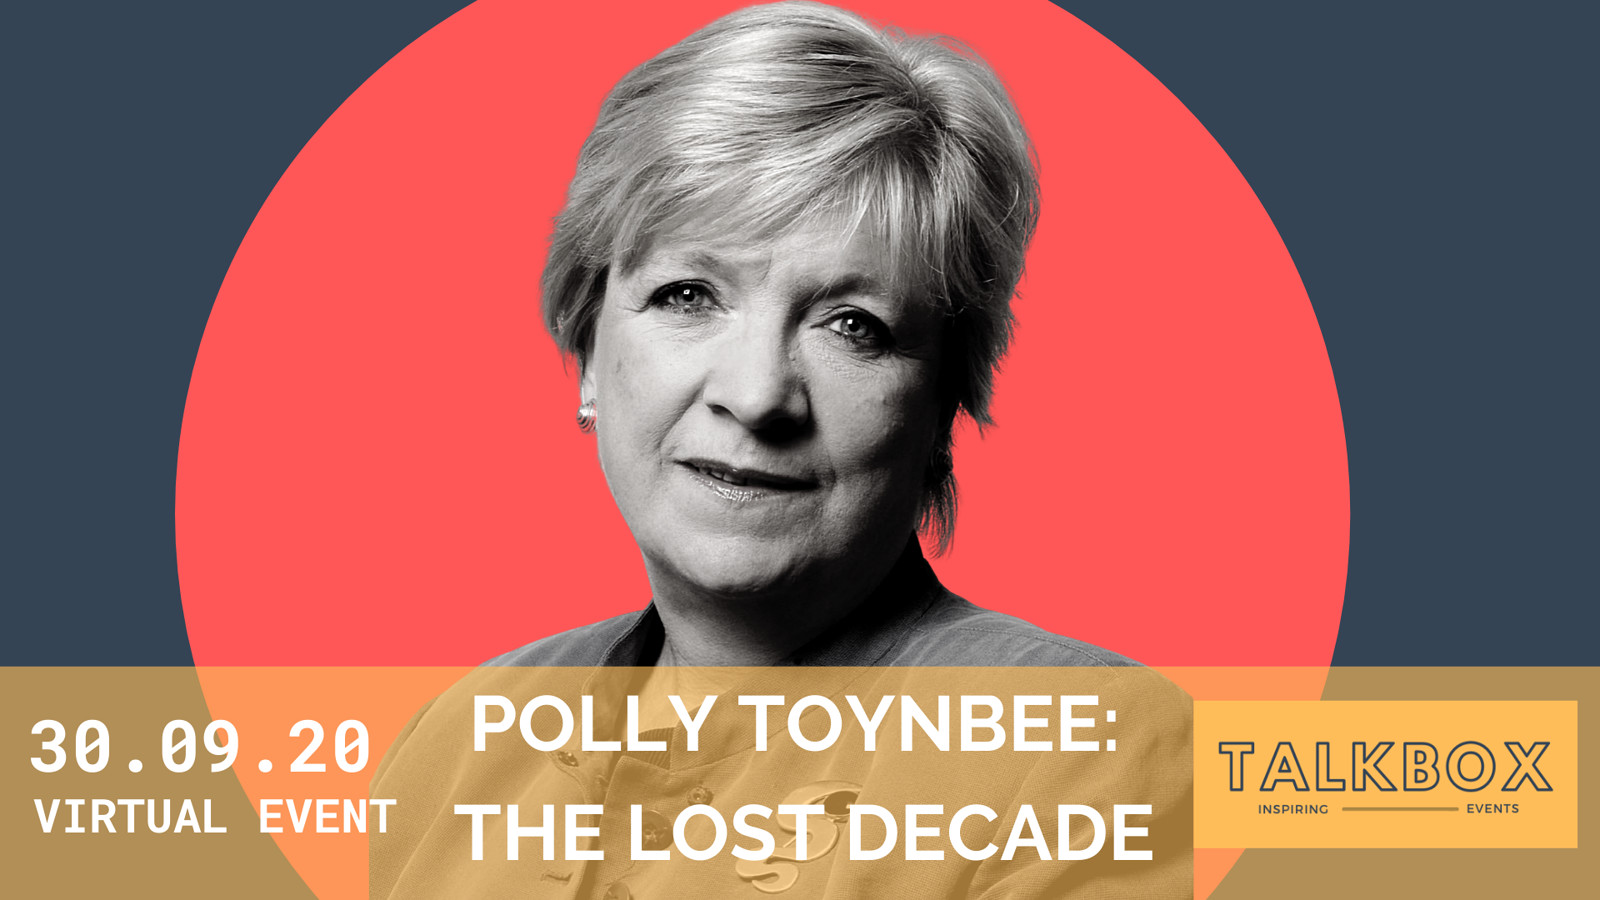 Polly Toynbee: The Lost Decade at Online Event